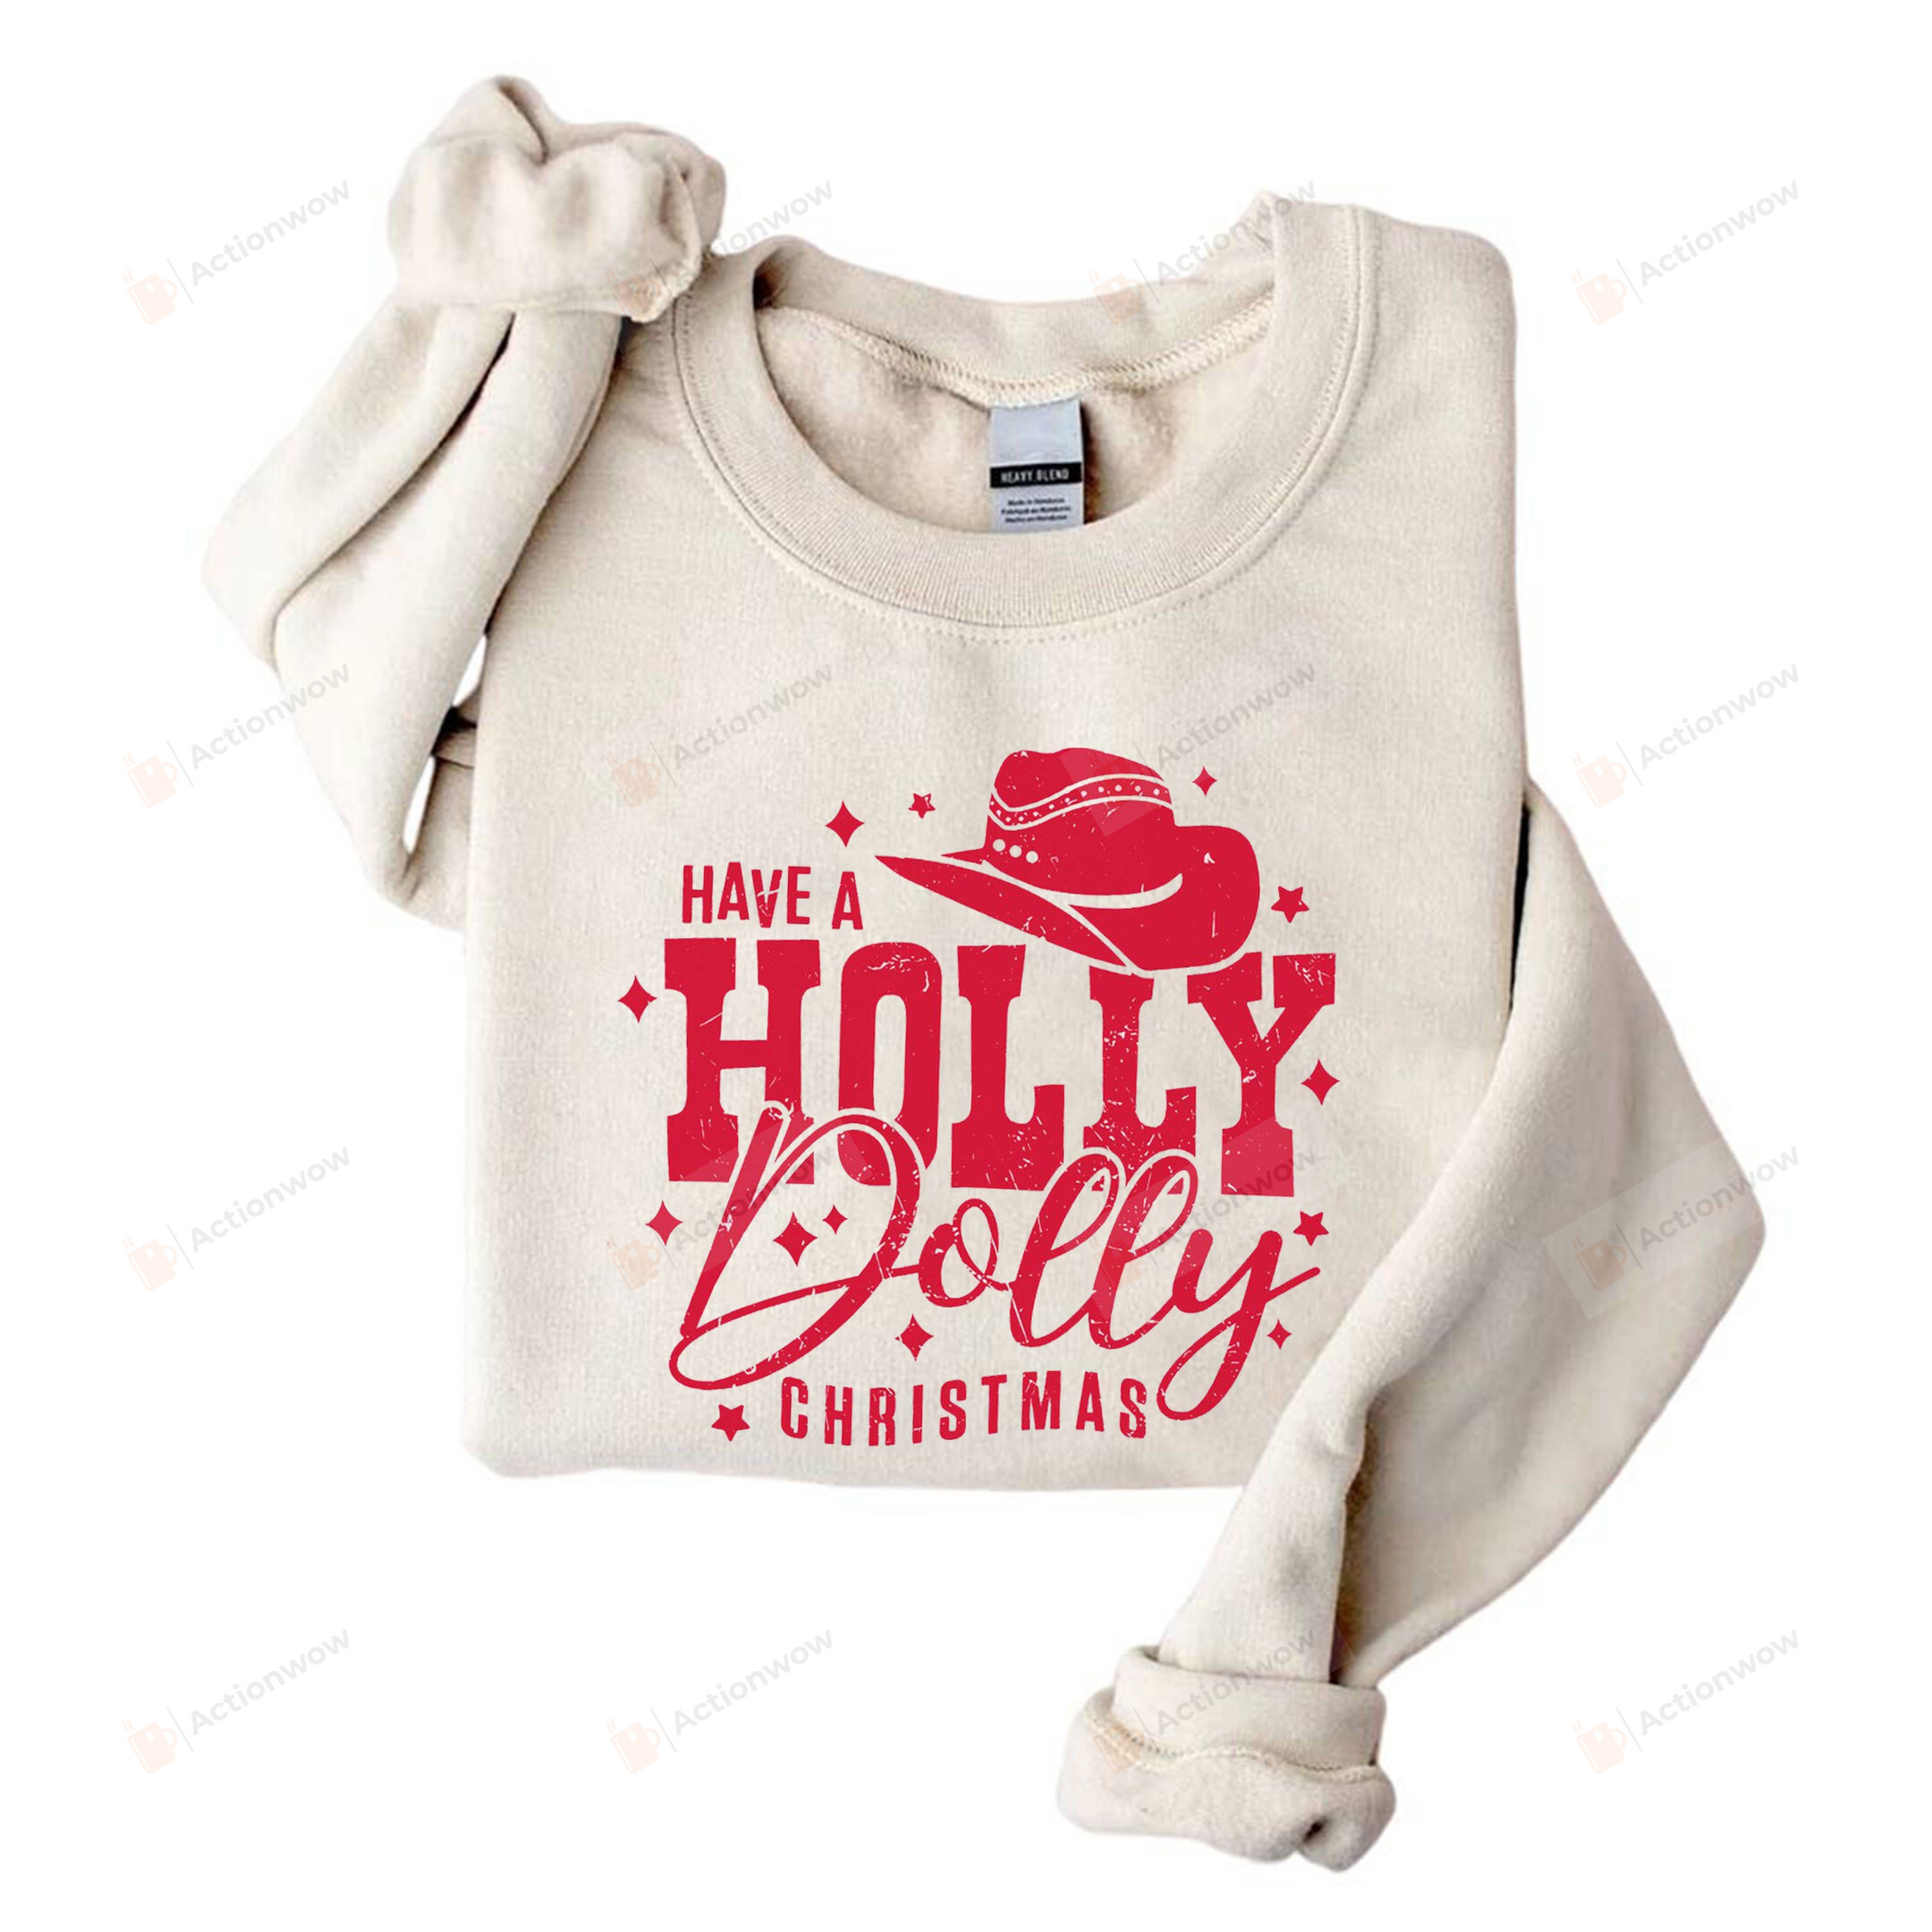 Christmas Sweatshirt, Have A Holly Dolly Christmas Sweatshirt, Disco Cowgirl Sweatshirt